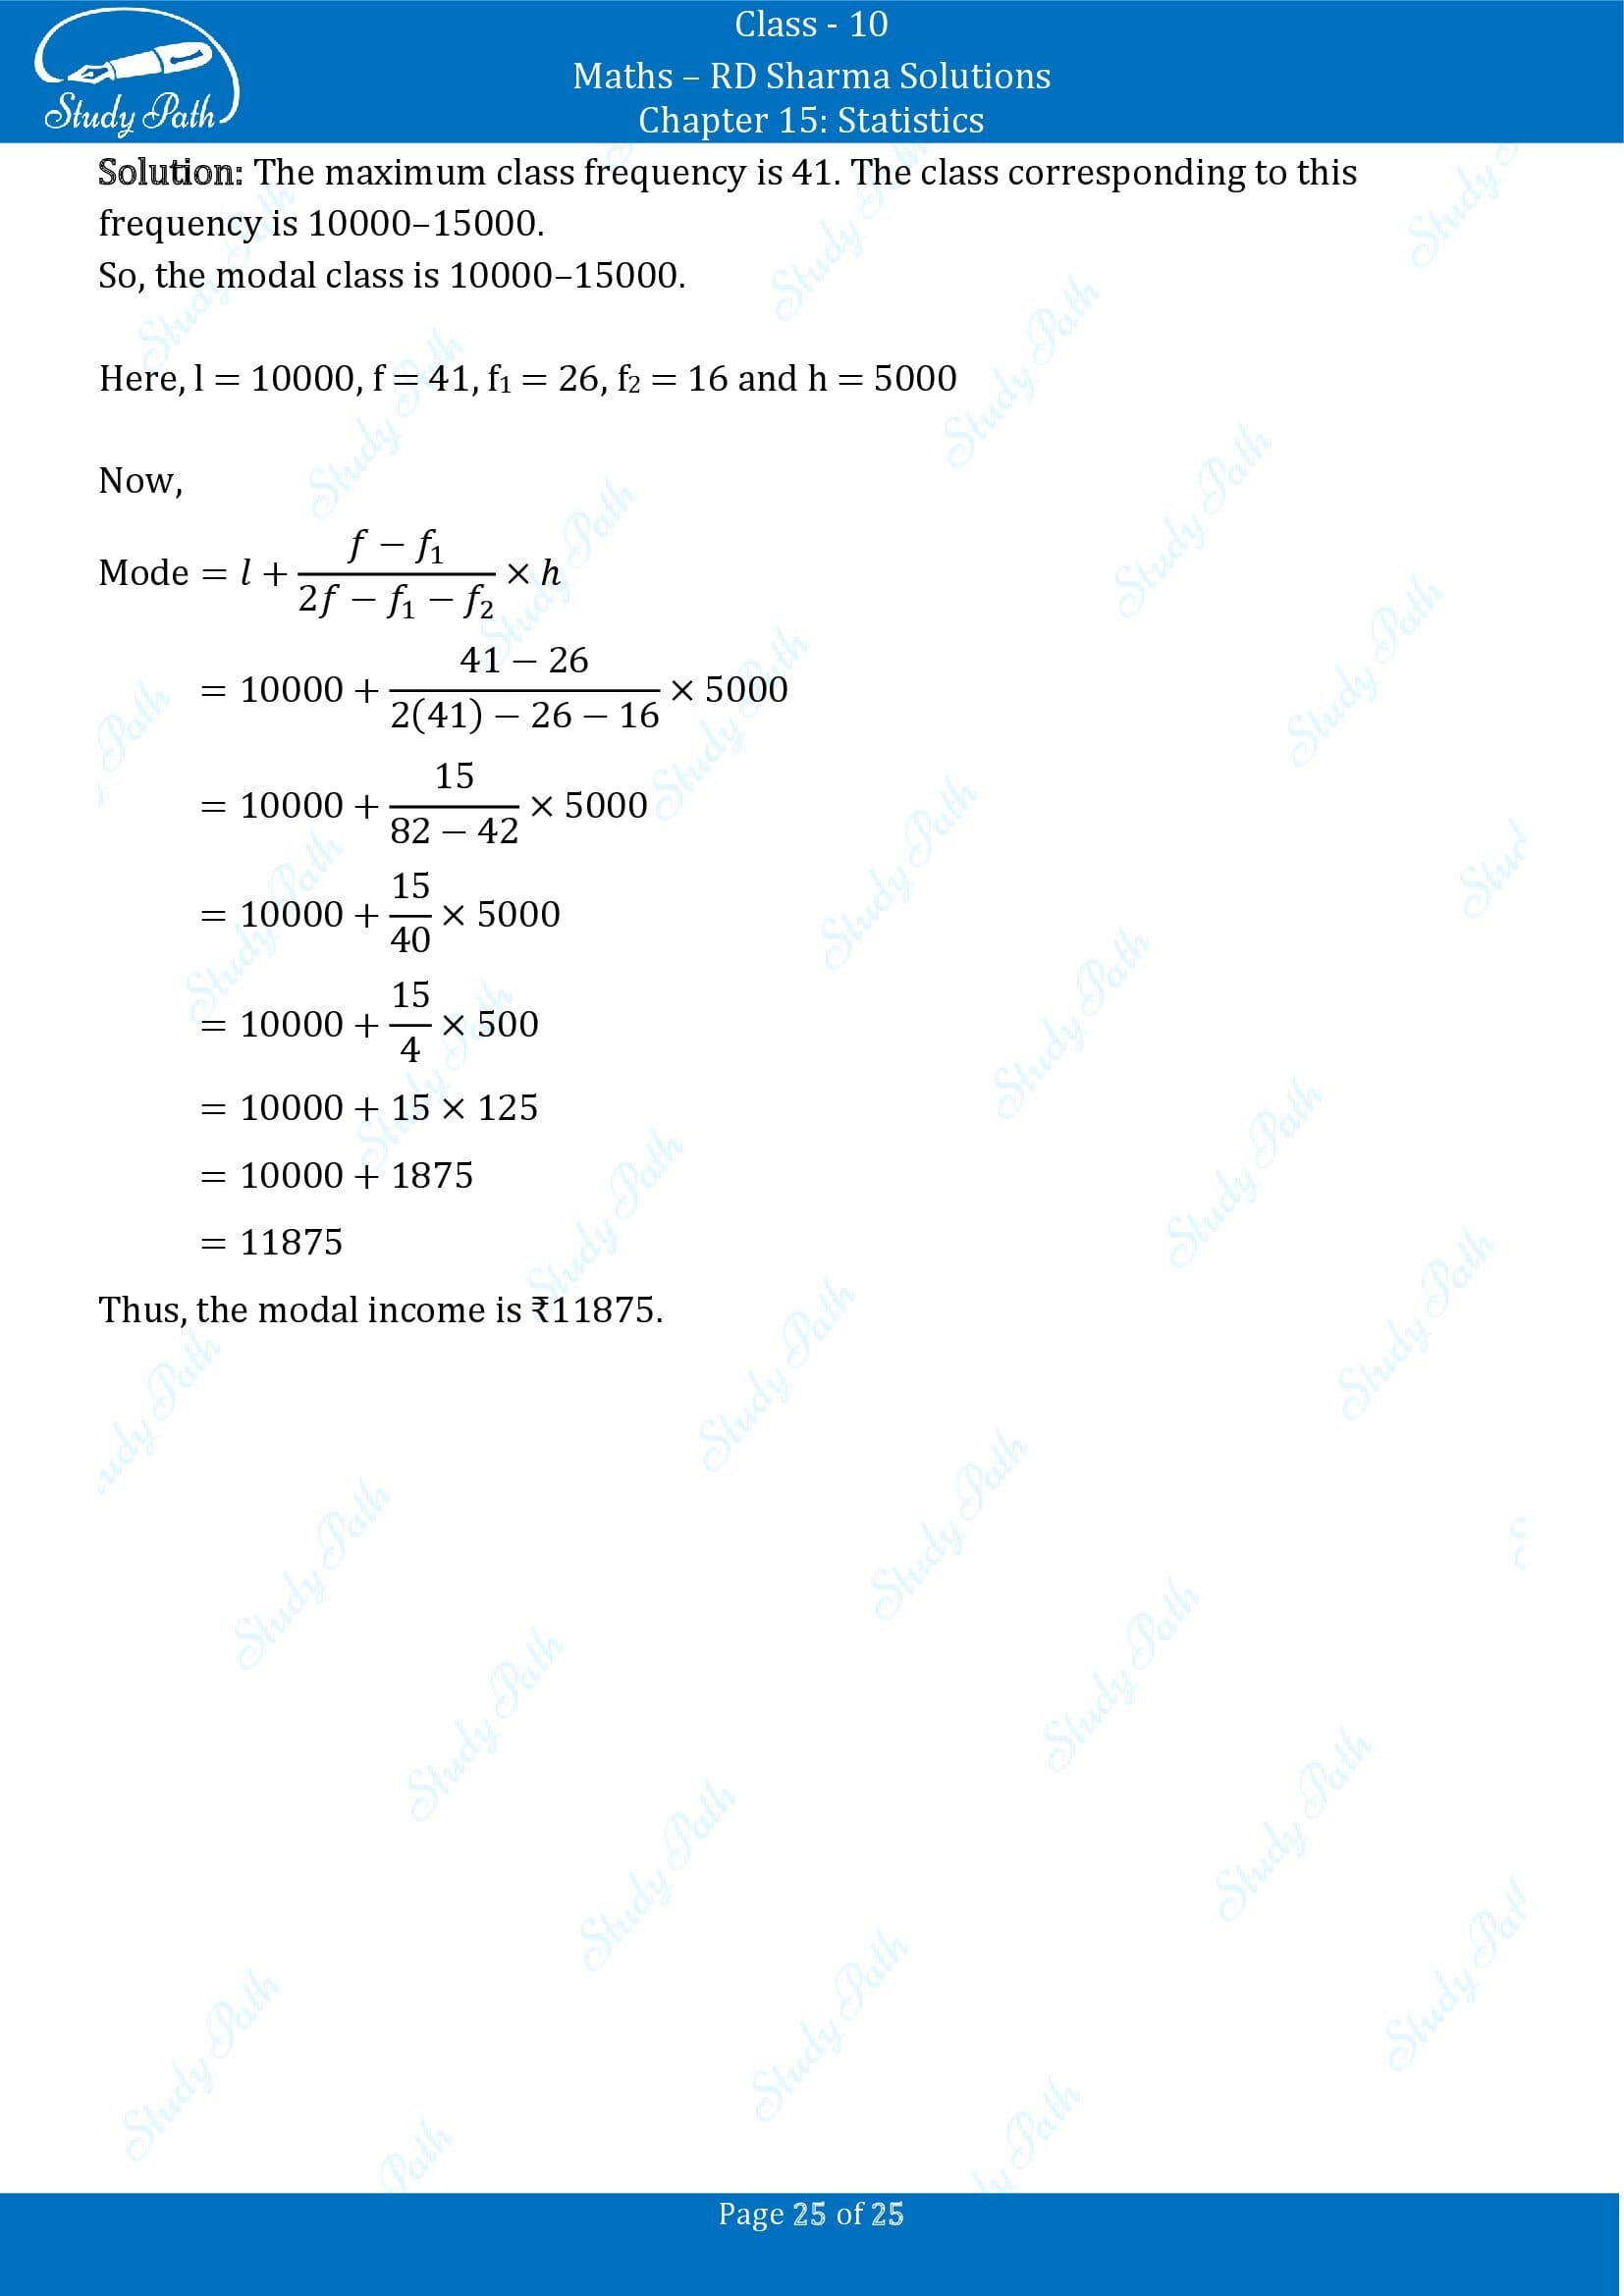 RD Sharma Solutions Class 10 Chapter 15 Statistics Exercise 15.5 00025